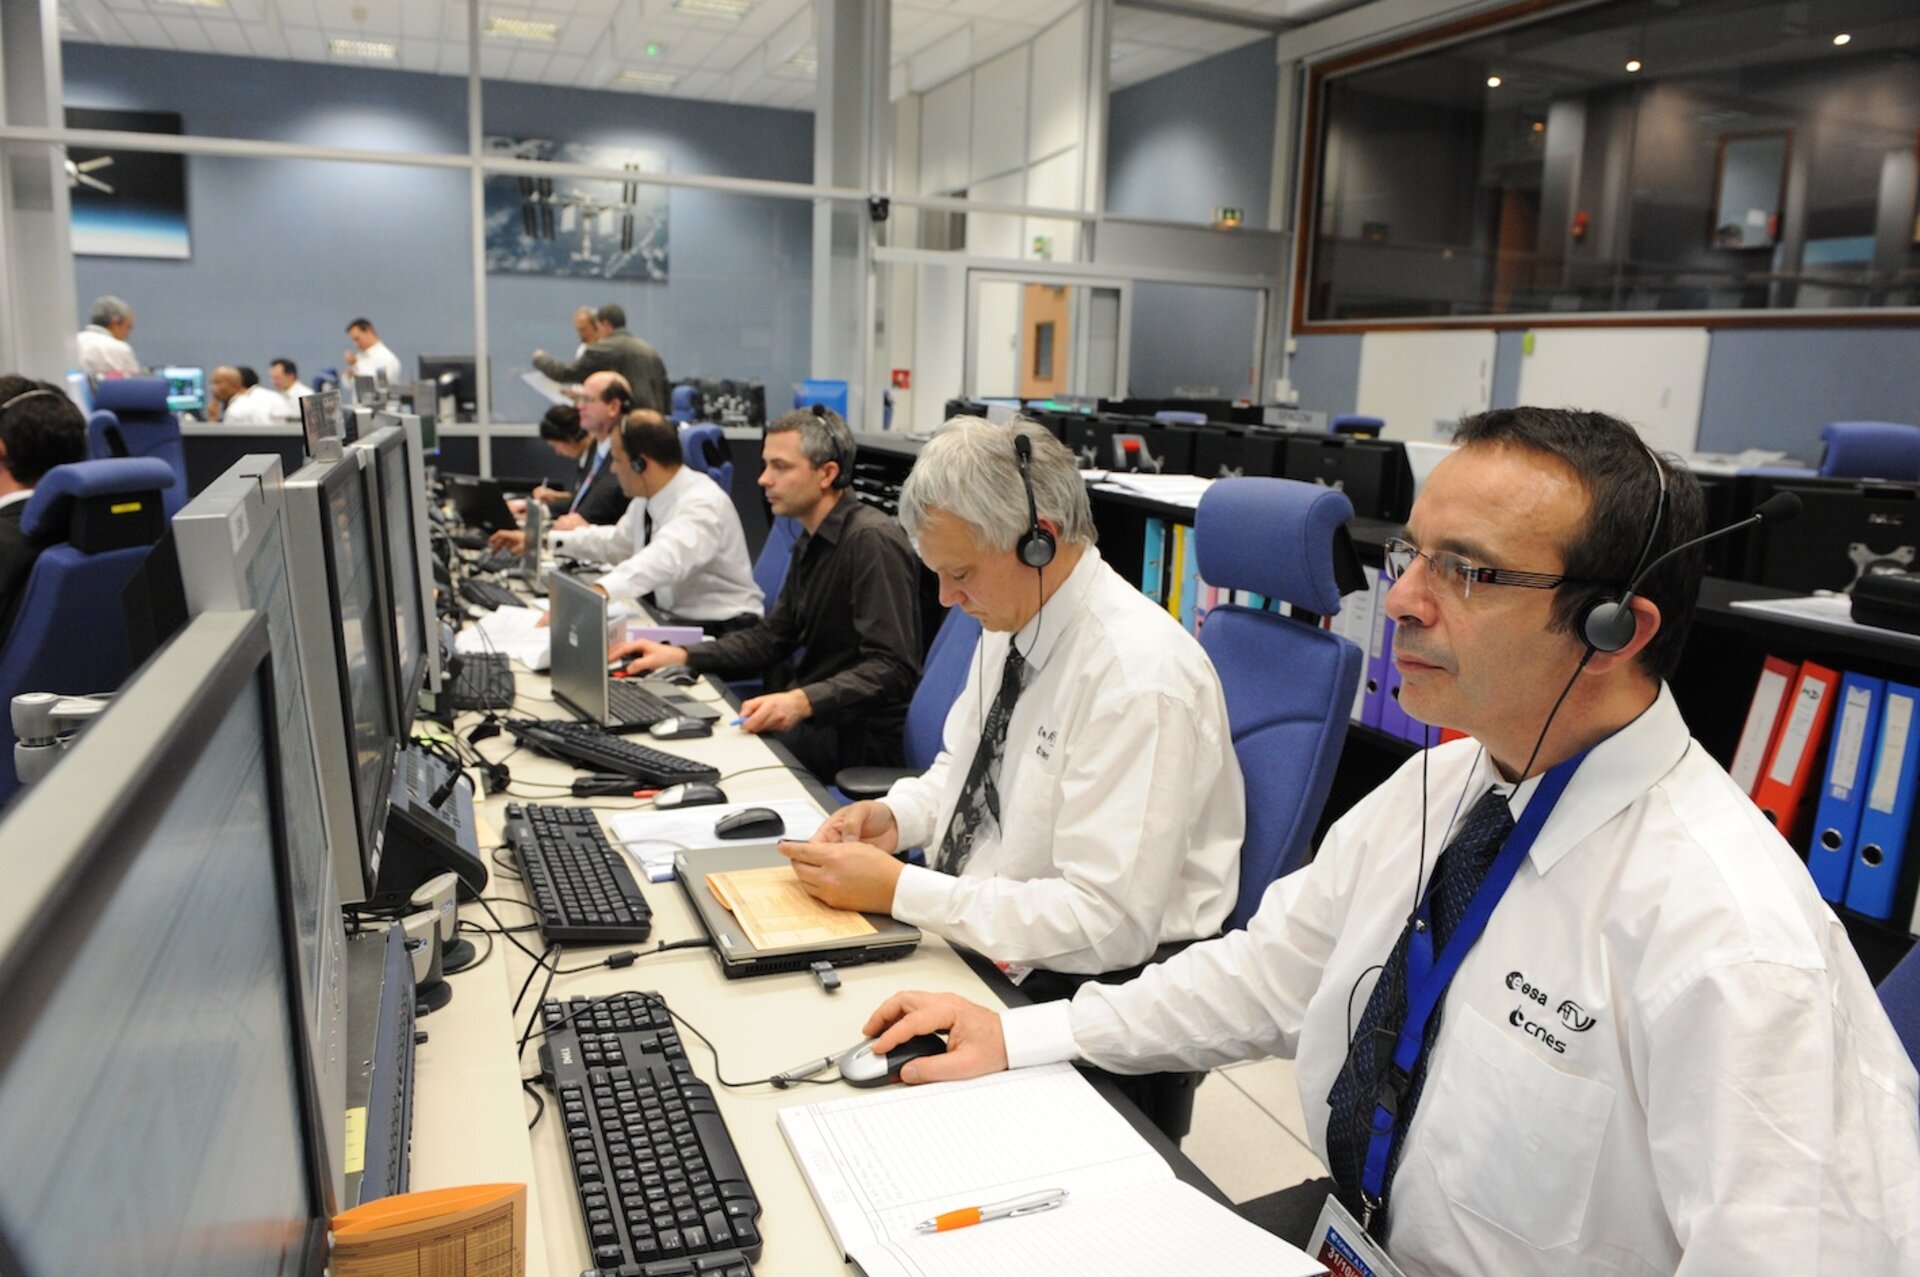 ESA mission controllers on console